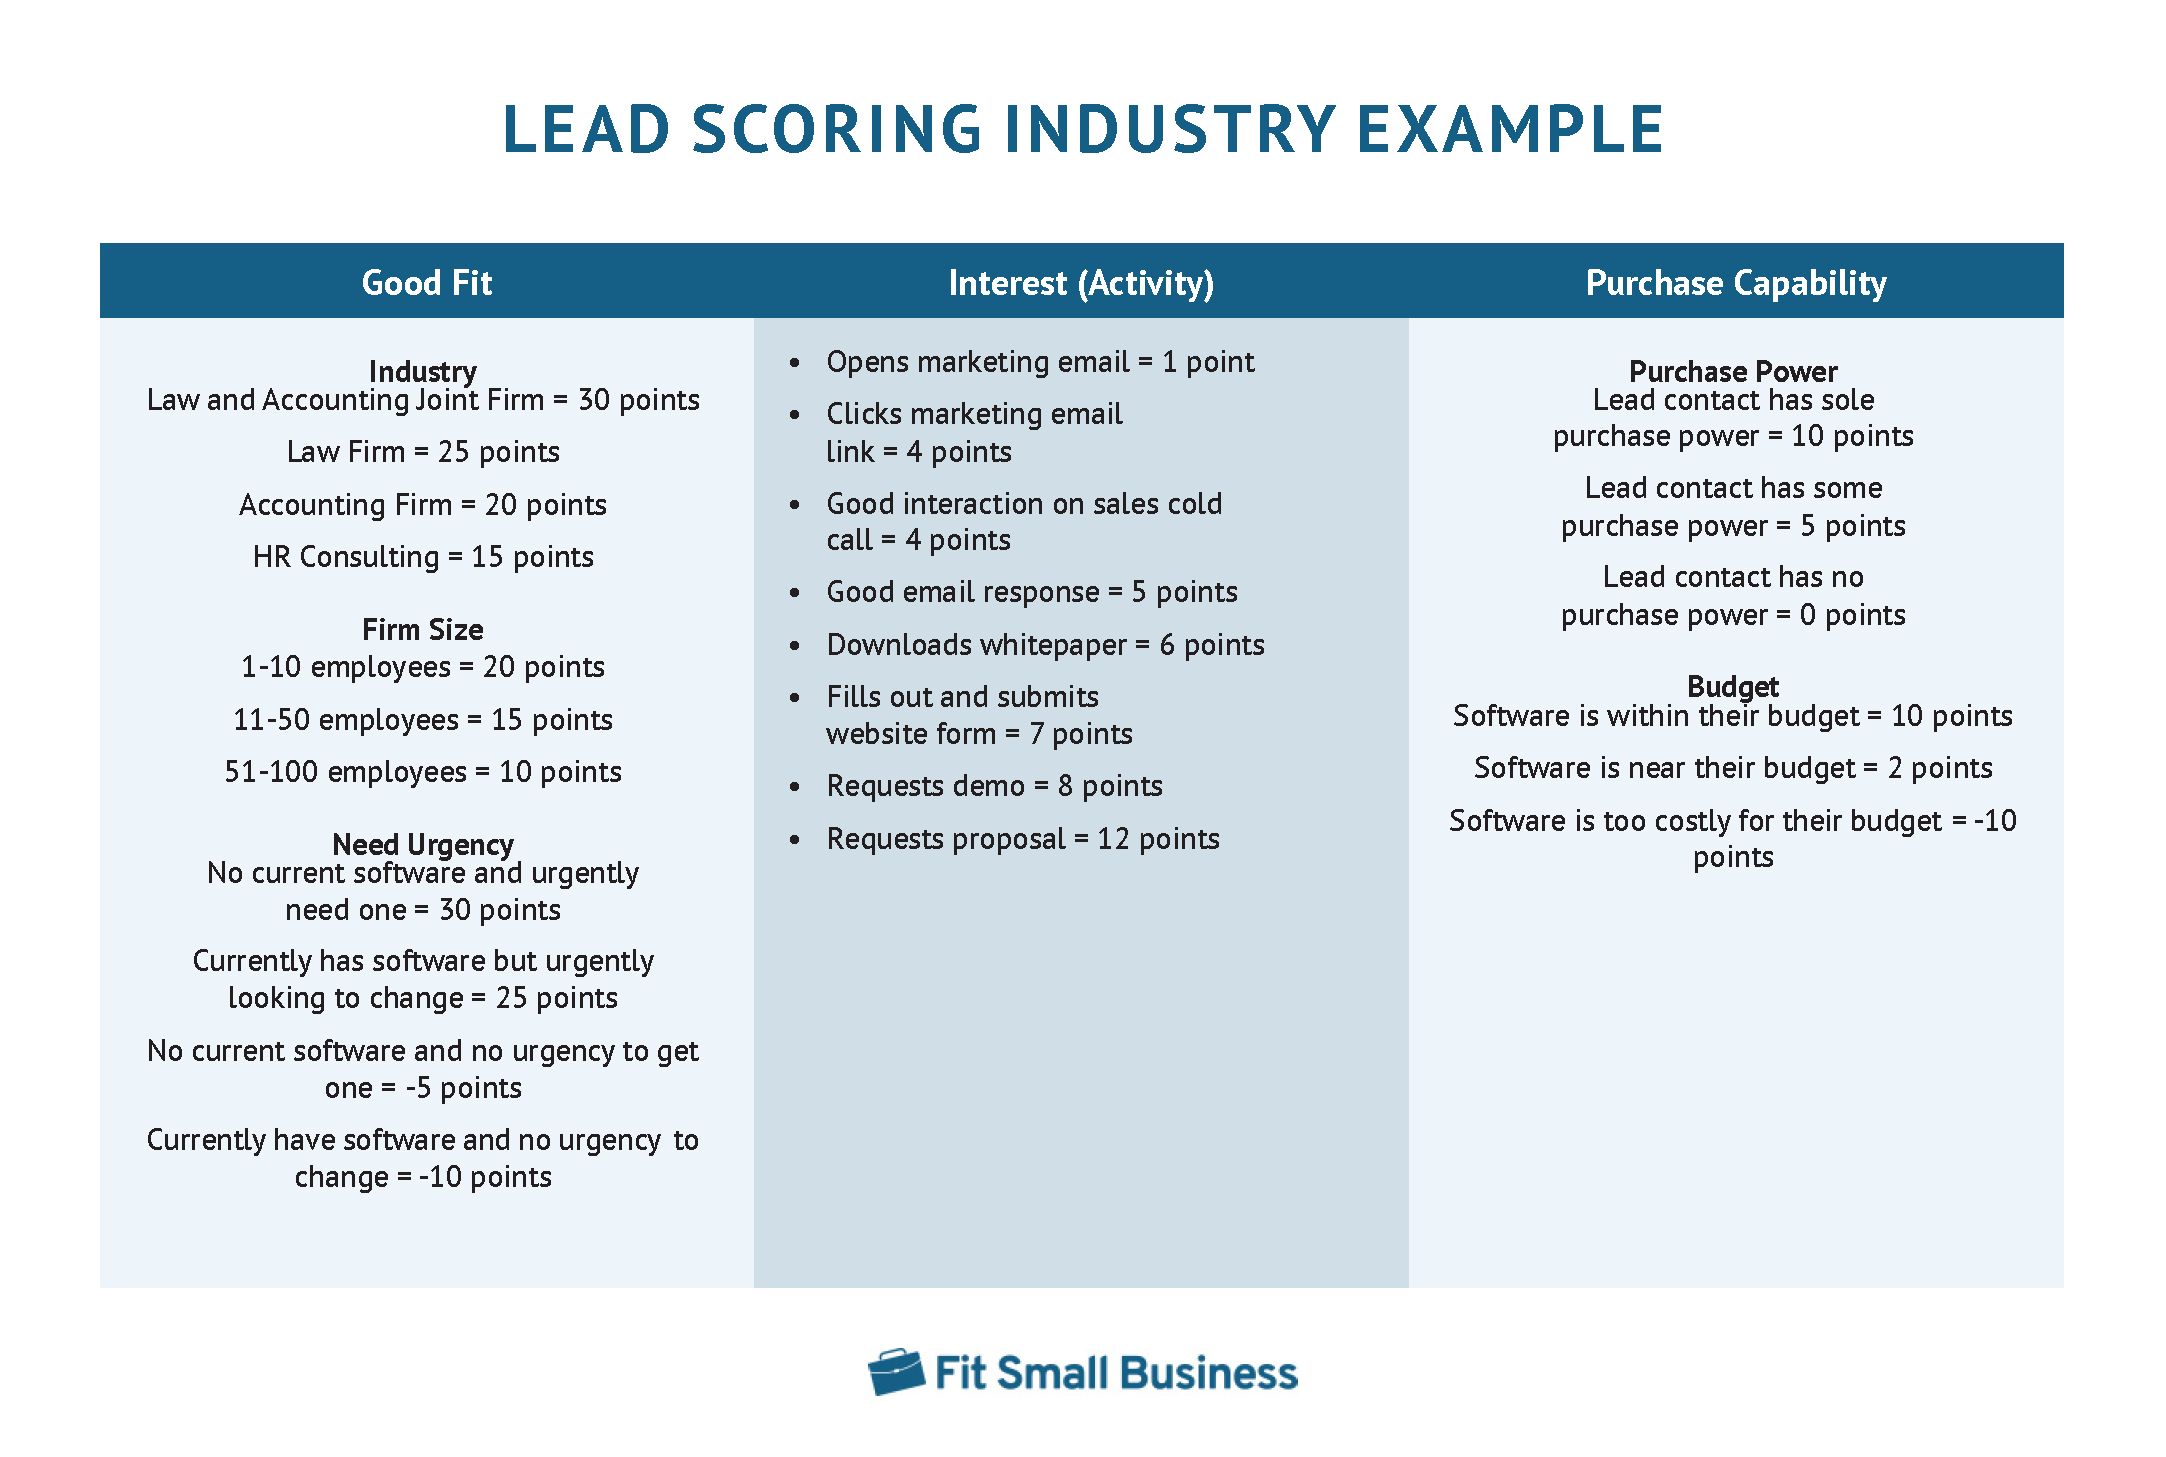 A chart shows how to do lead scoring for five different types of companies.